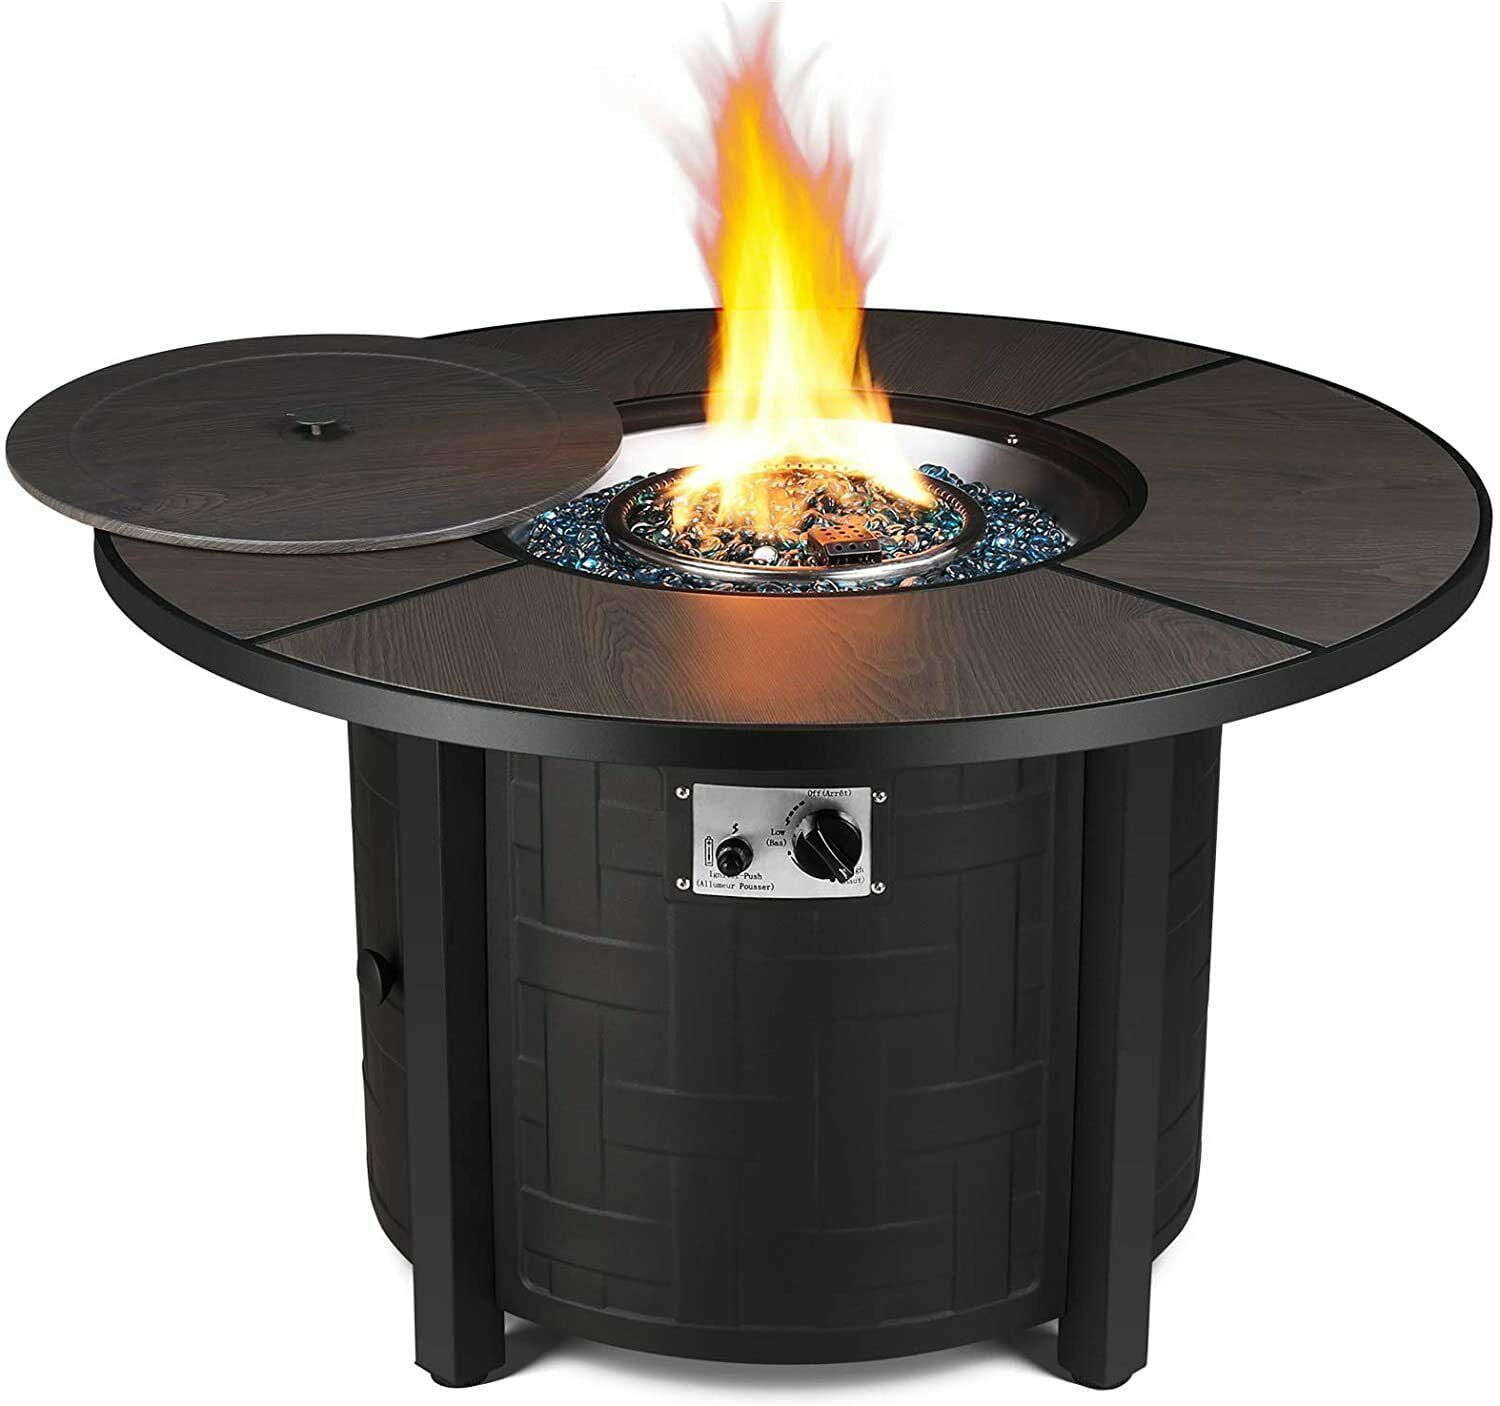 Bahom 42 Propane Gas Fire Pit Table 50, Outdoor Gas Fireplace With Glass Rocks